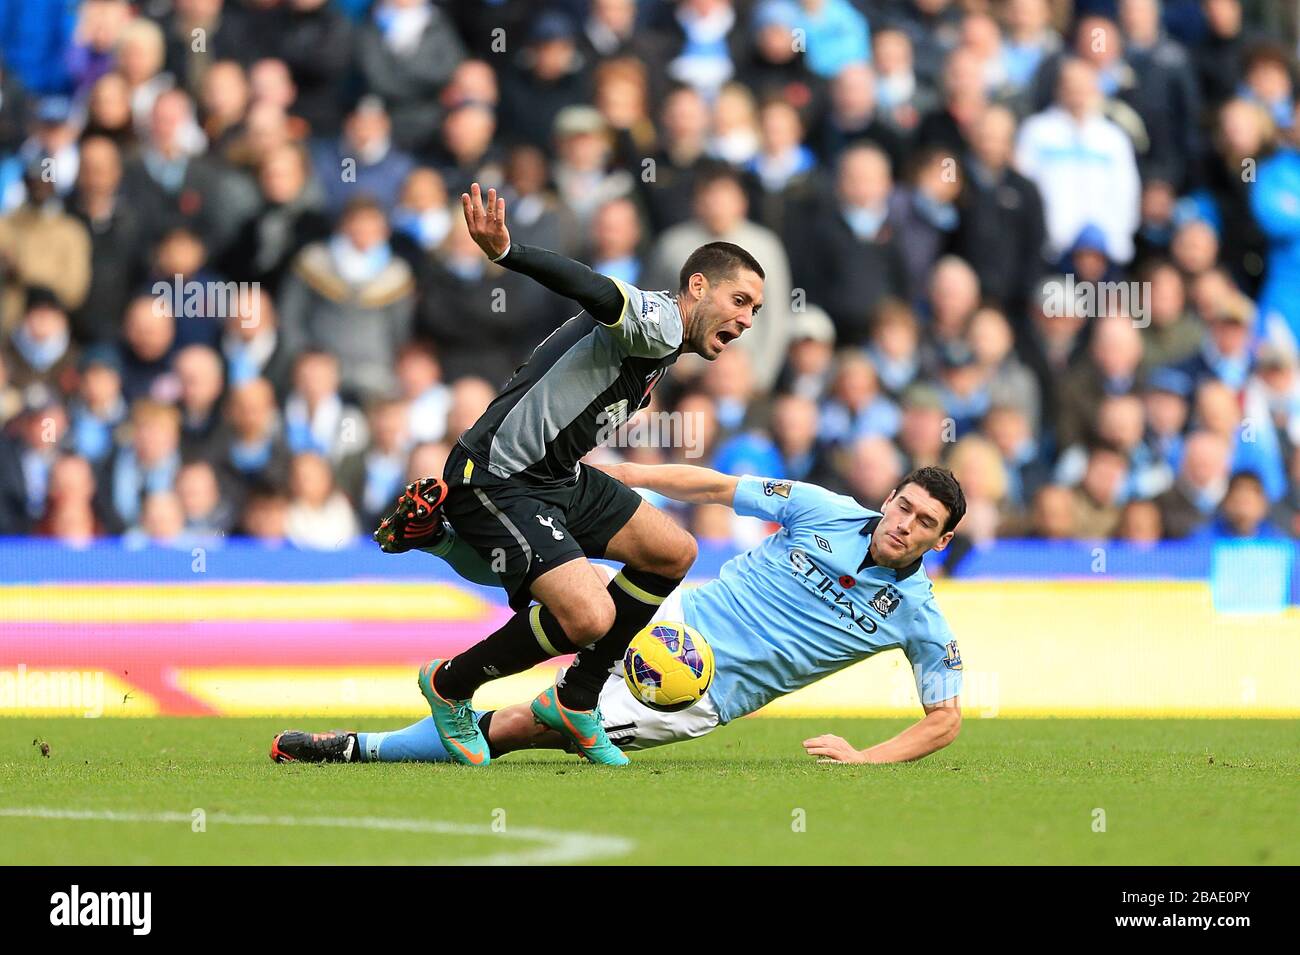 Manchester City's Gareth Barry (right) slides in on Tottenham Hotspur's Clint Dempsey (left) Stock Photo